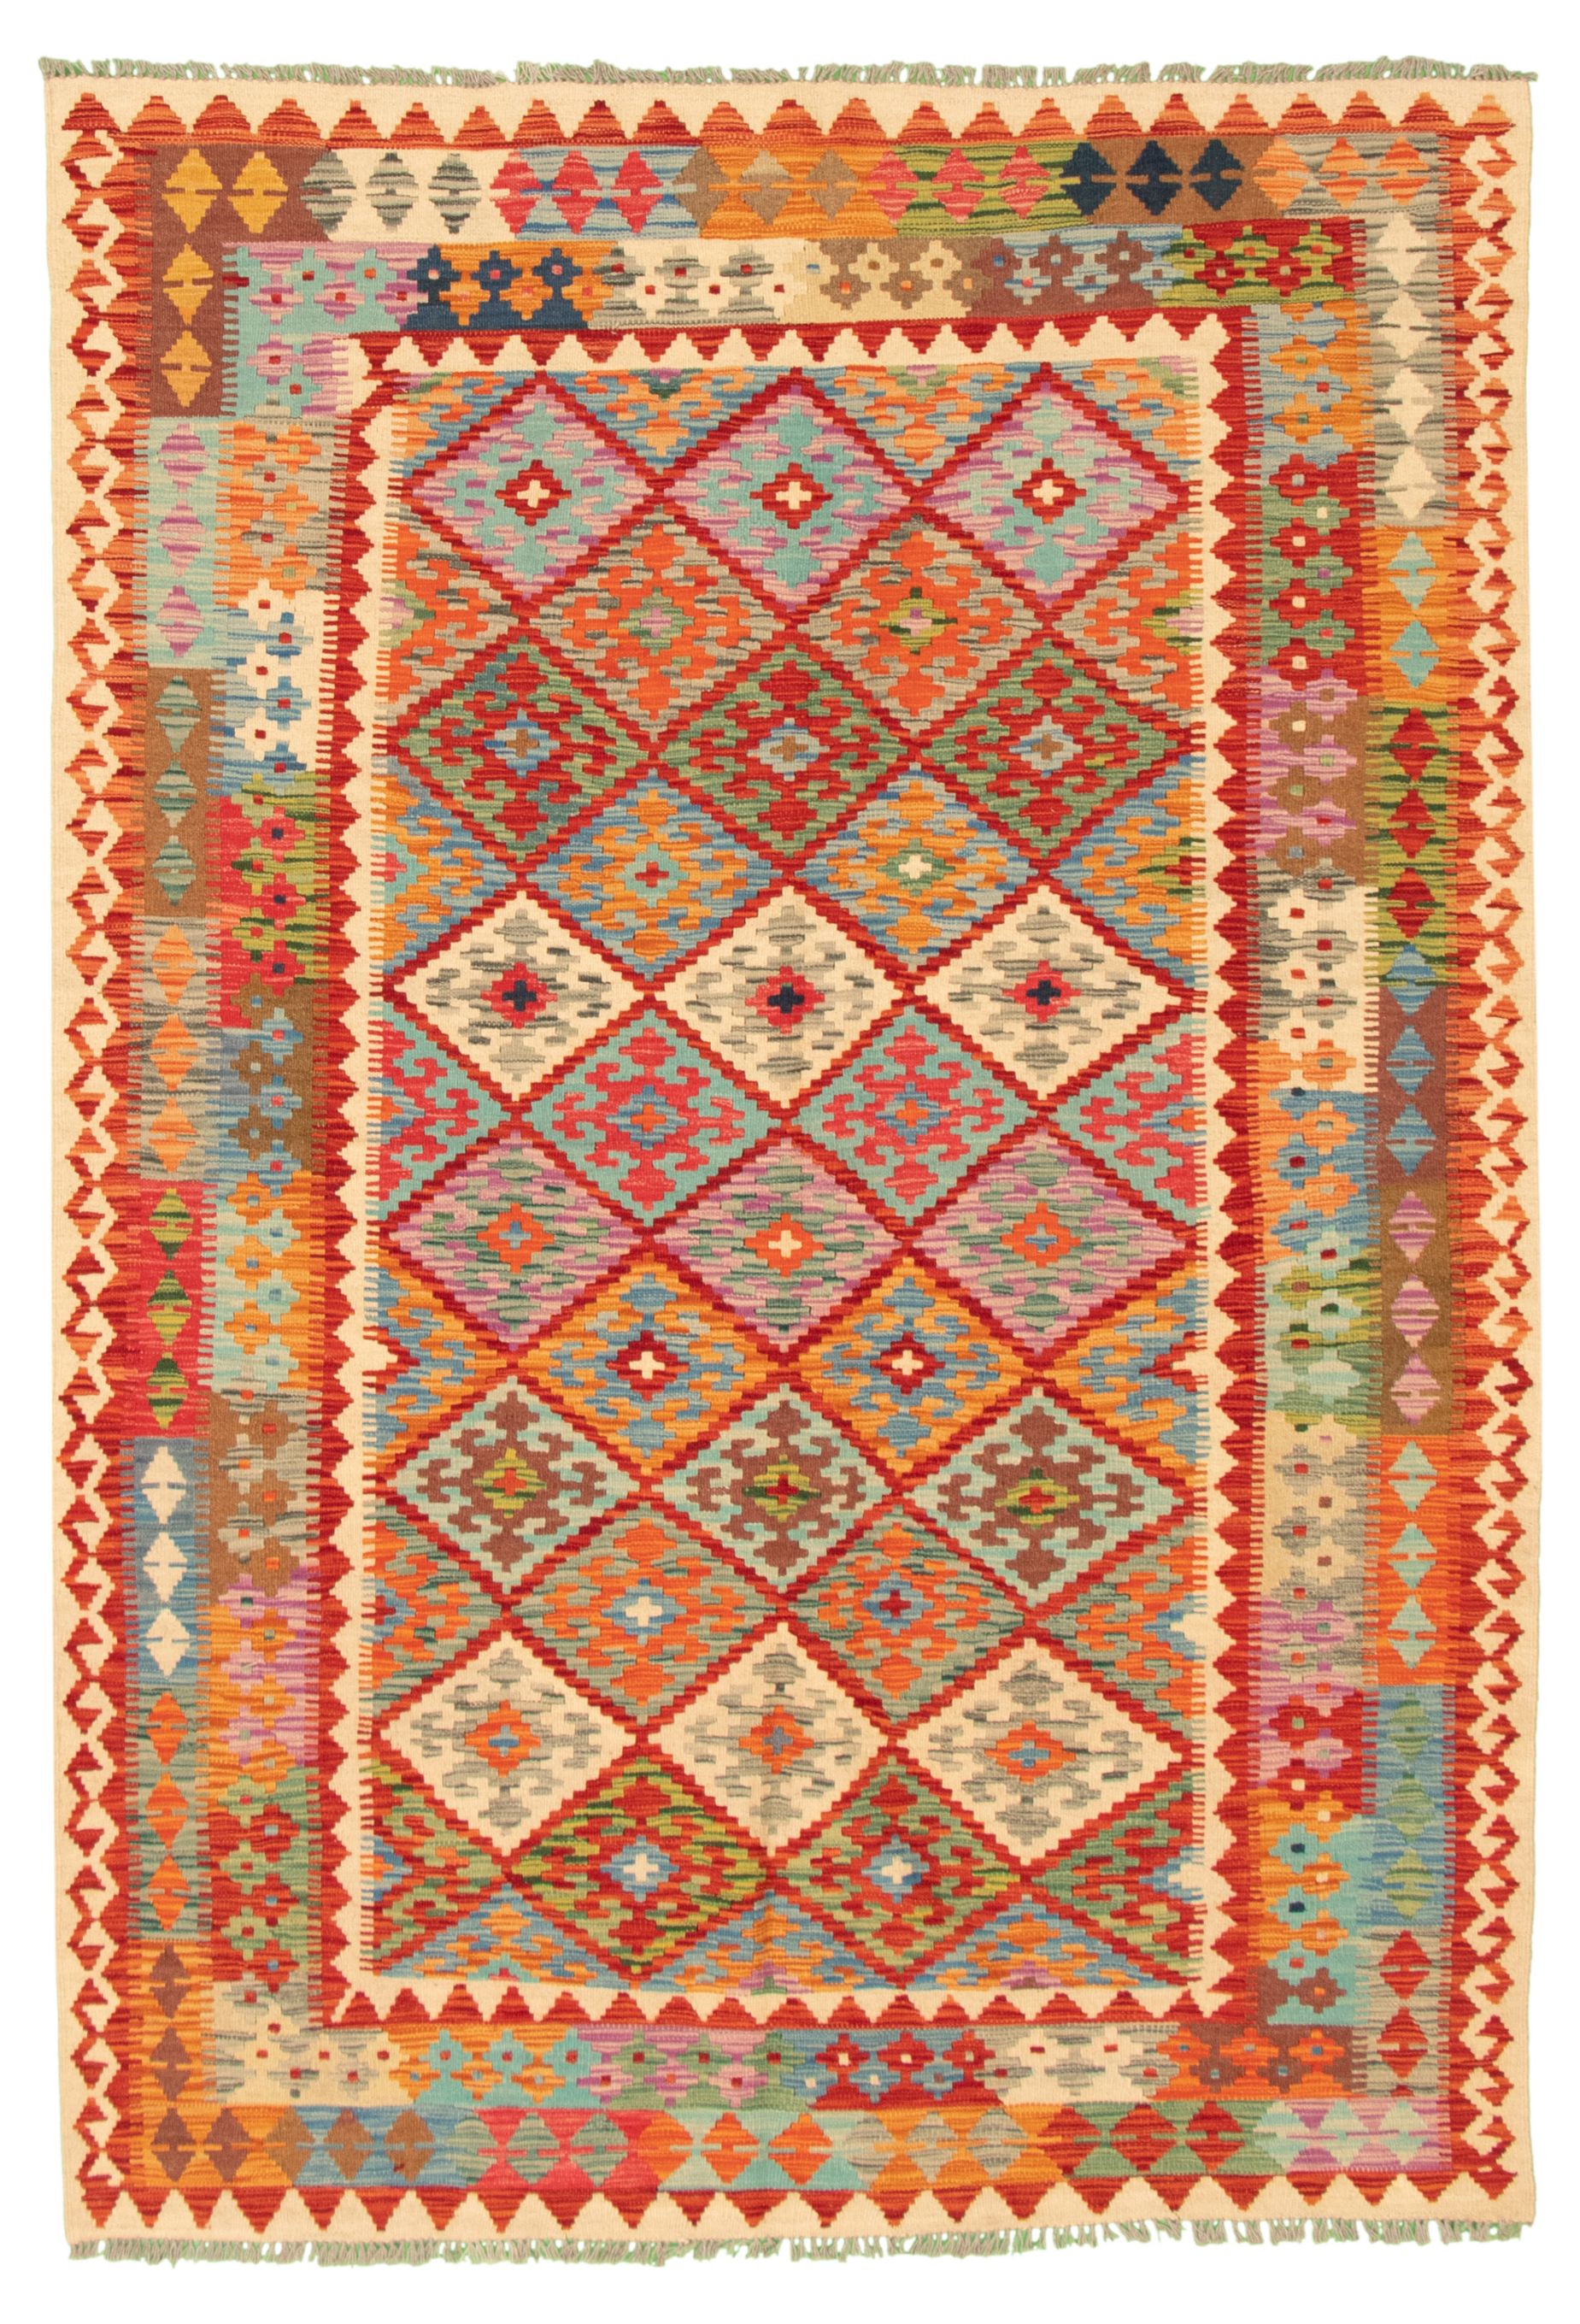 Hand woven Bold and Colorful  Red Wool Kilim 5'10" x 8'5" Size: 5'10" x 8'5"  